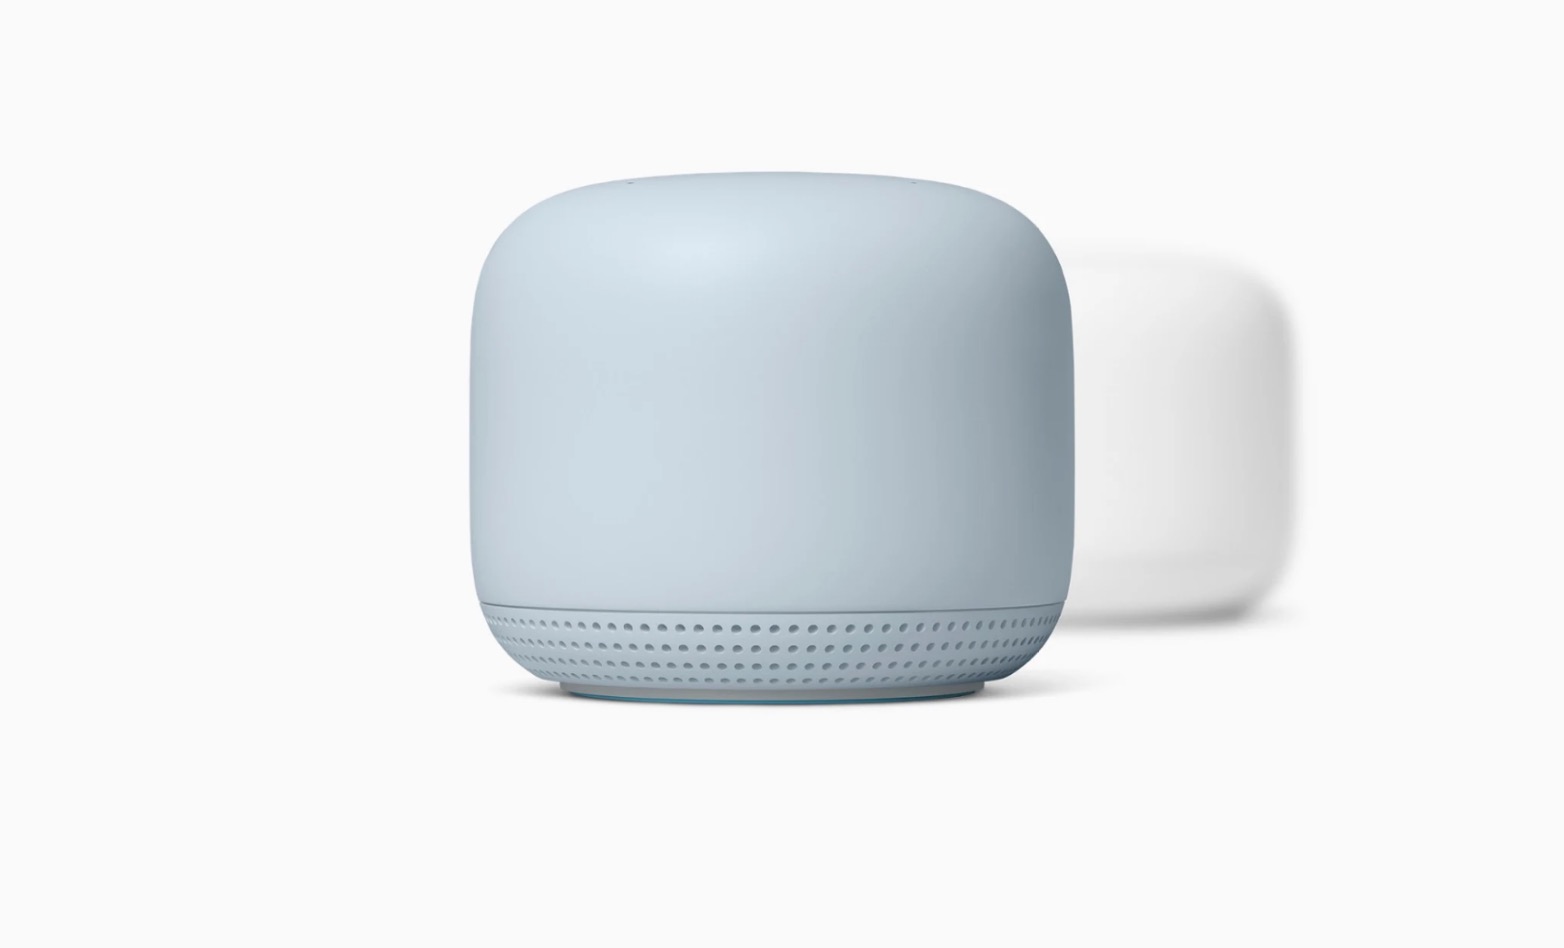 The Google Nest Wifi combines Google Home and Wi-Fi in the same product.